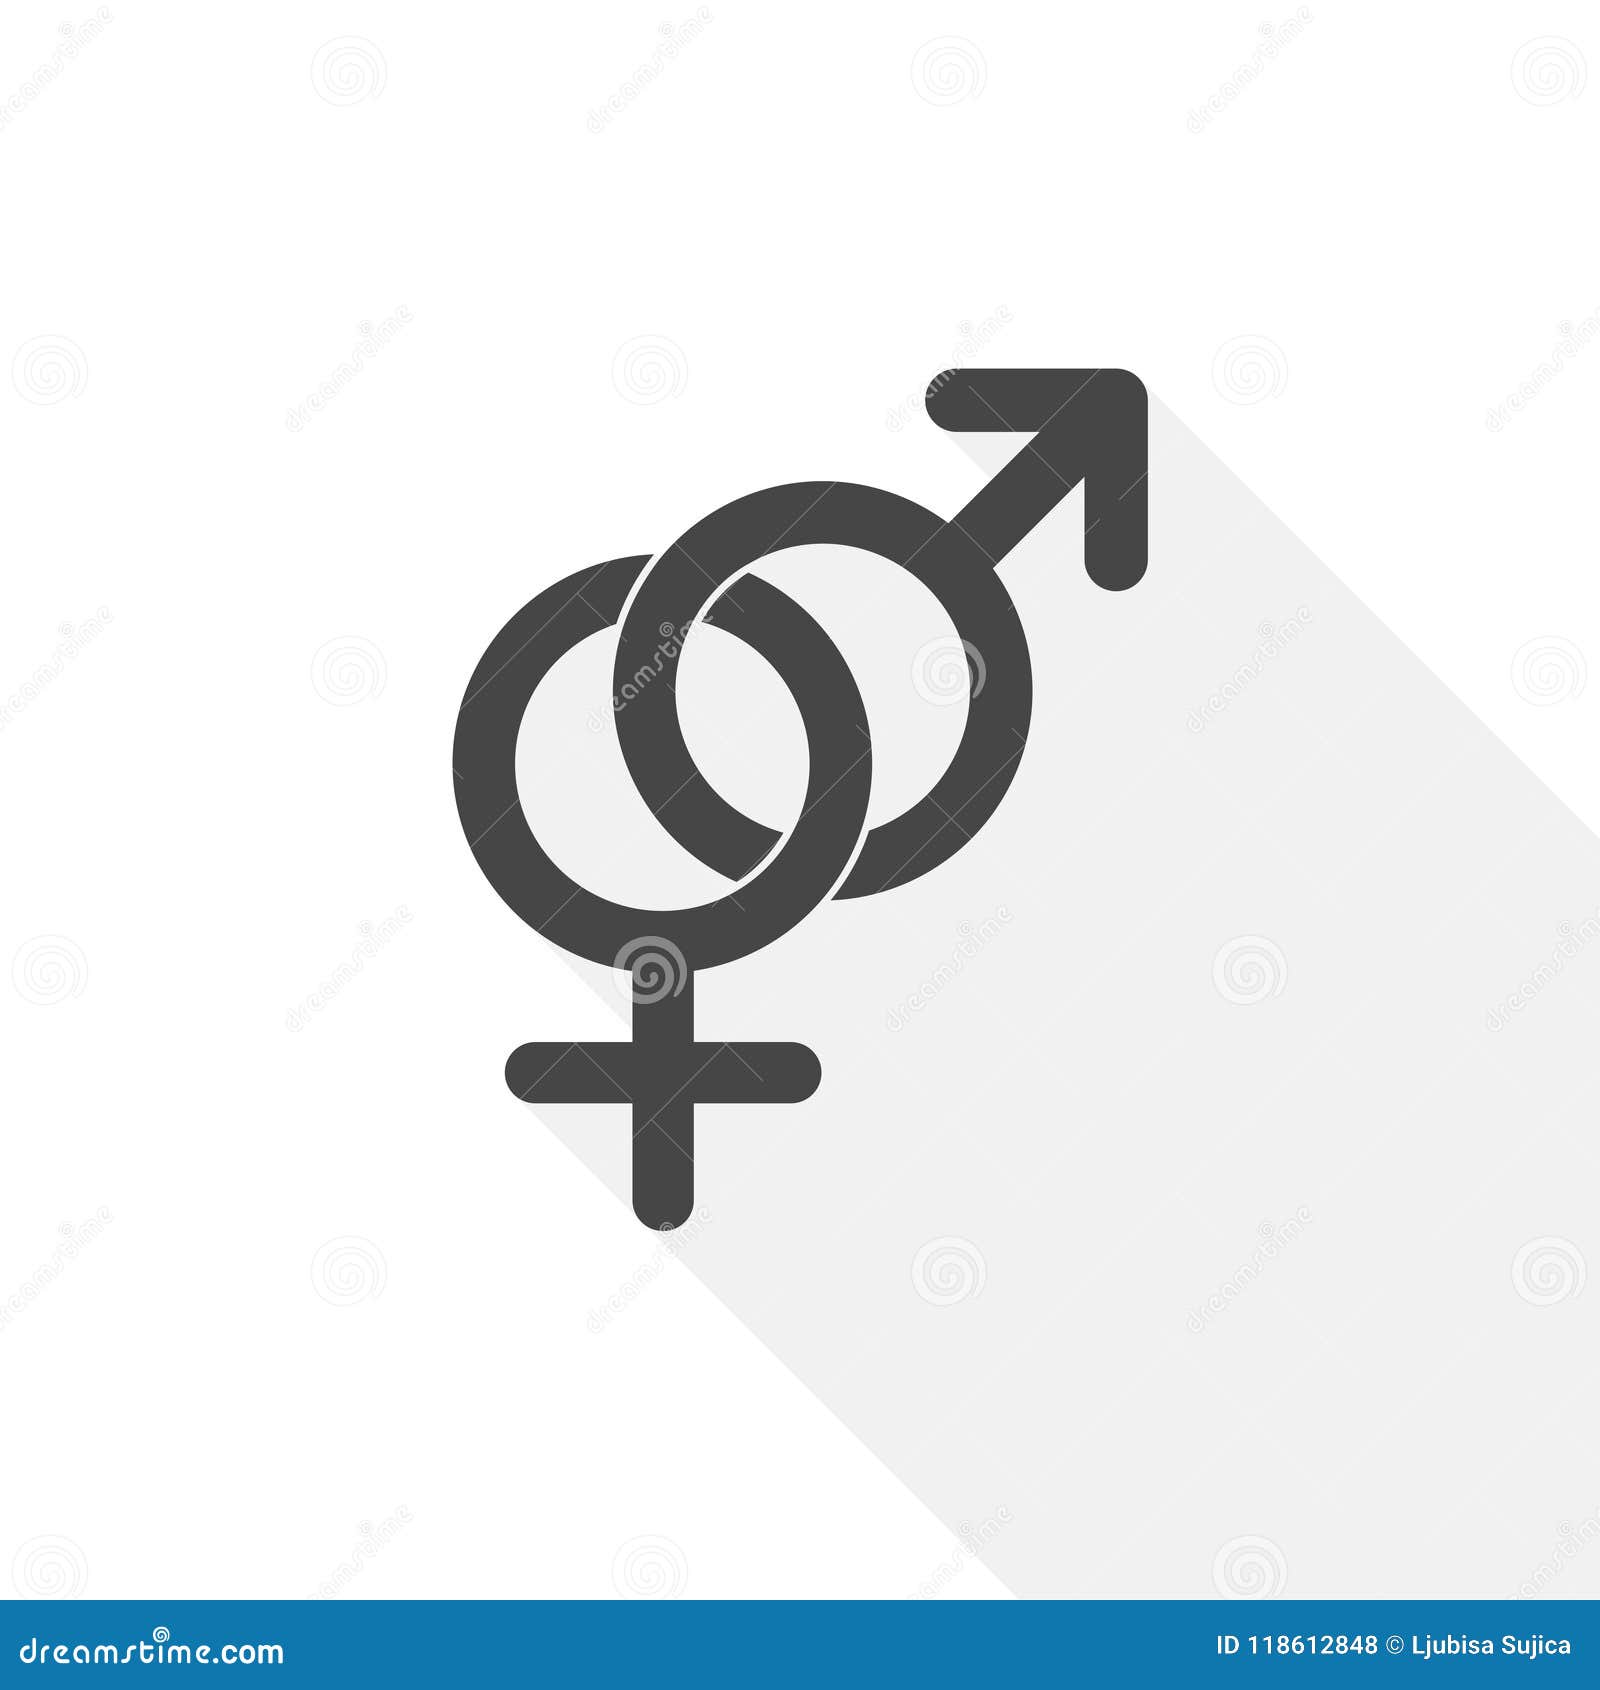 Male and female sex symbol stock vector